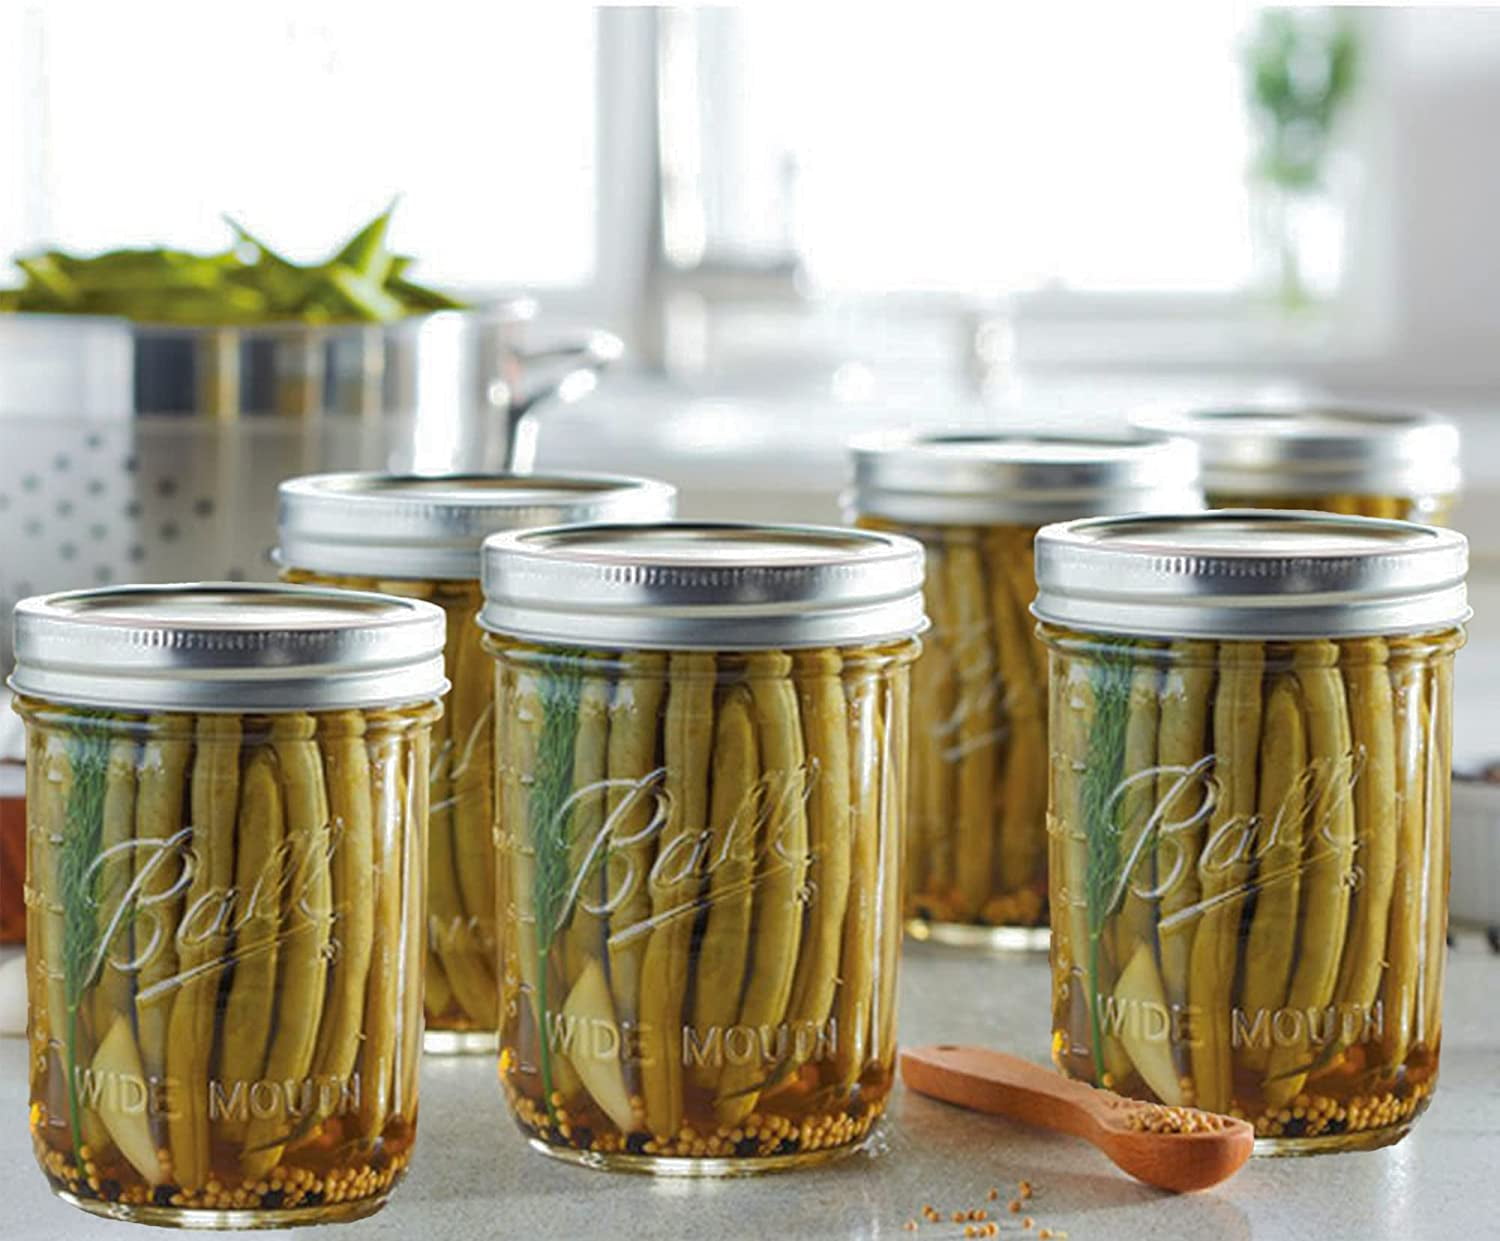 Ball® Wide Mouth Glass Canning Jars - 16 oz